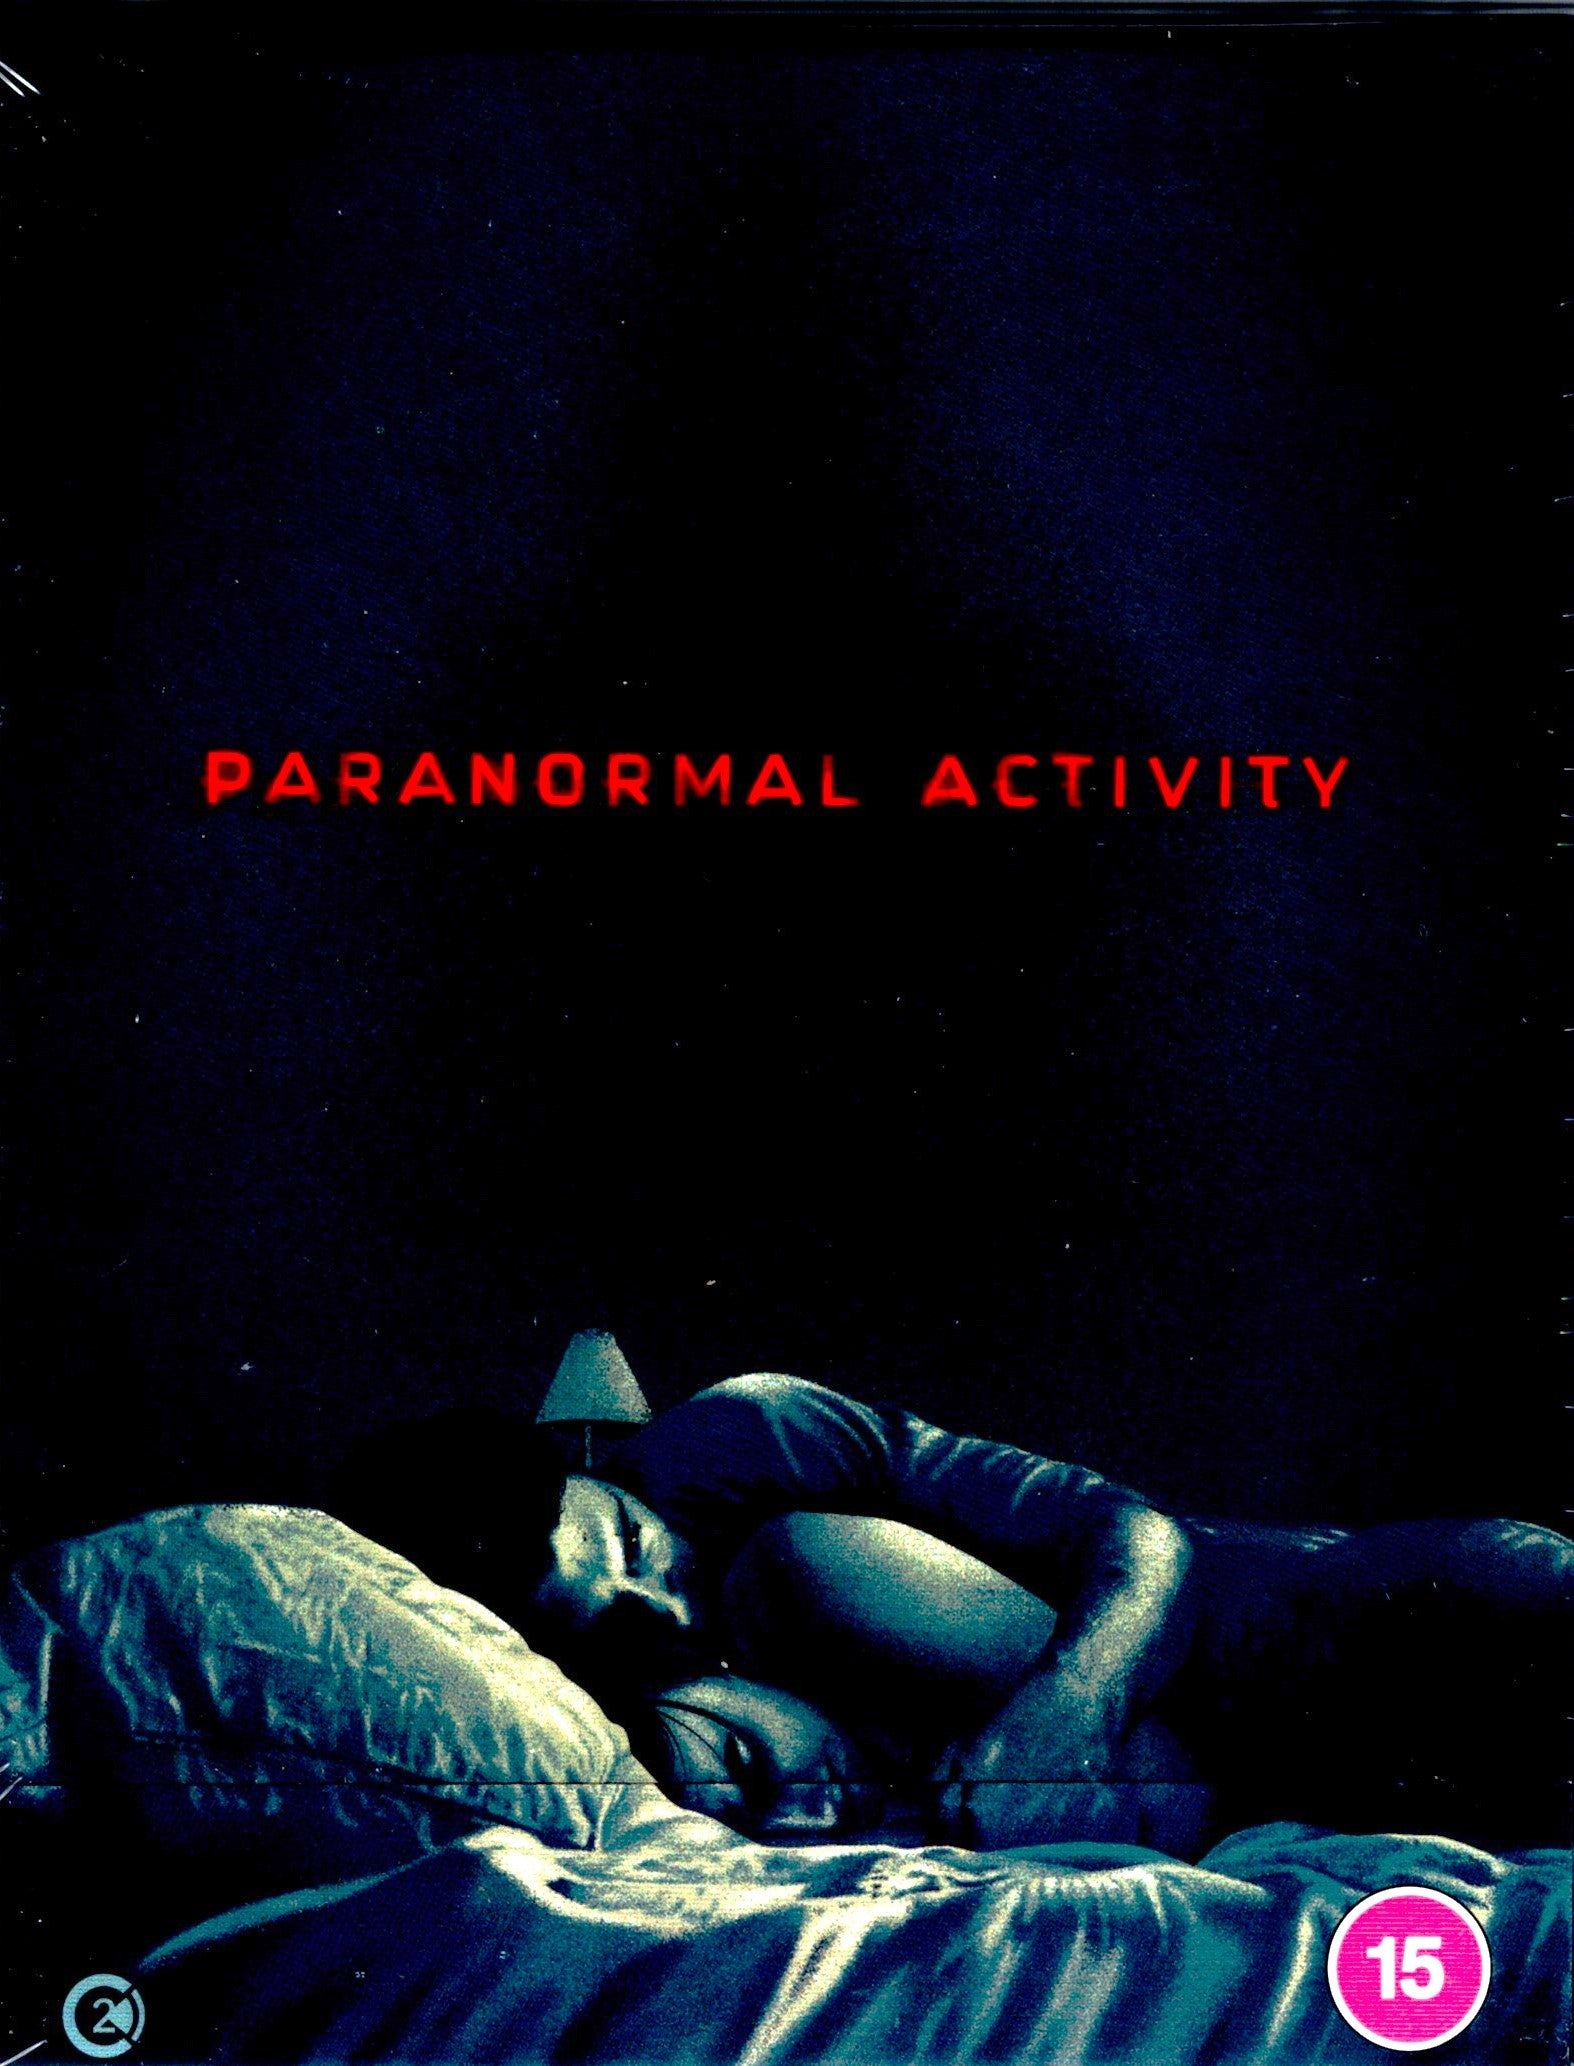 PARANORMAL ACTIVITY (REGION B IMPORT - LIMITED EDITION) BLU-RAY